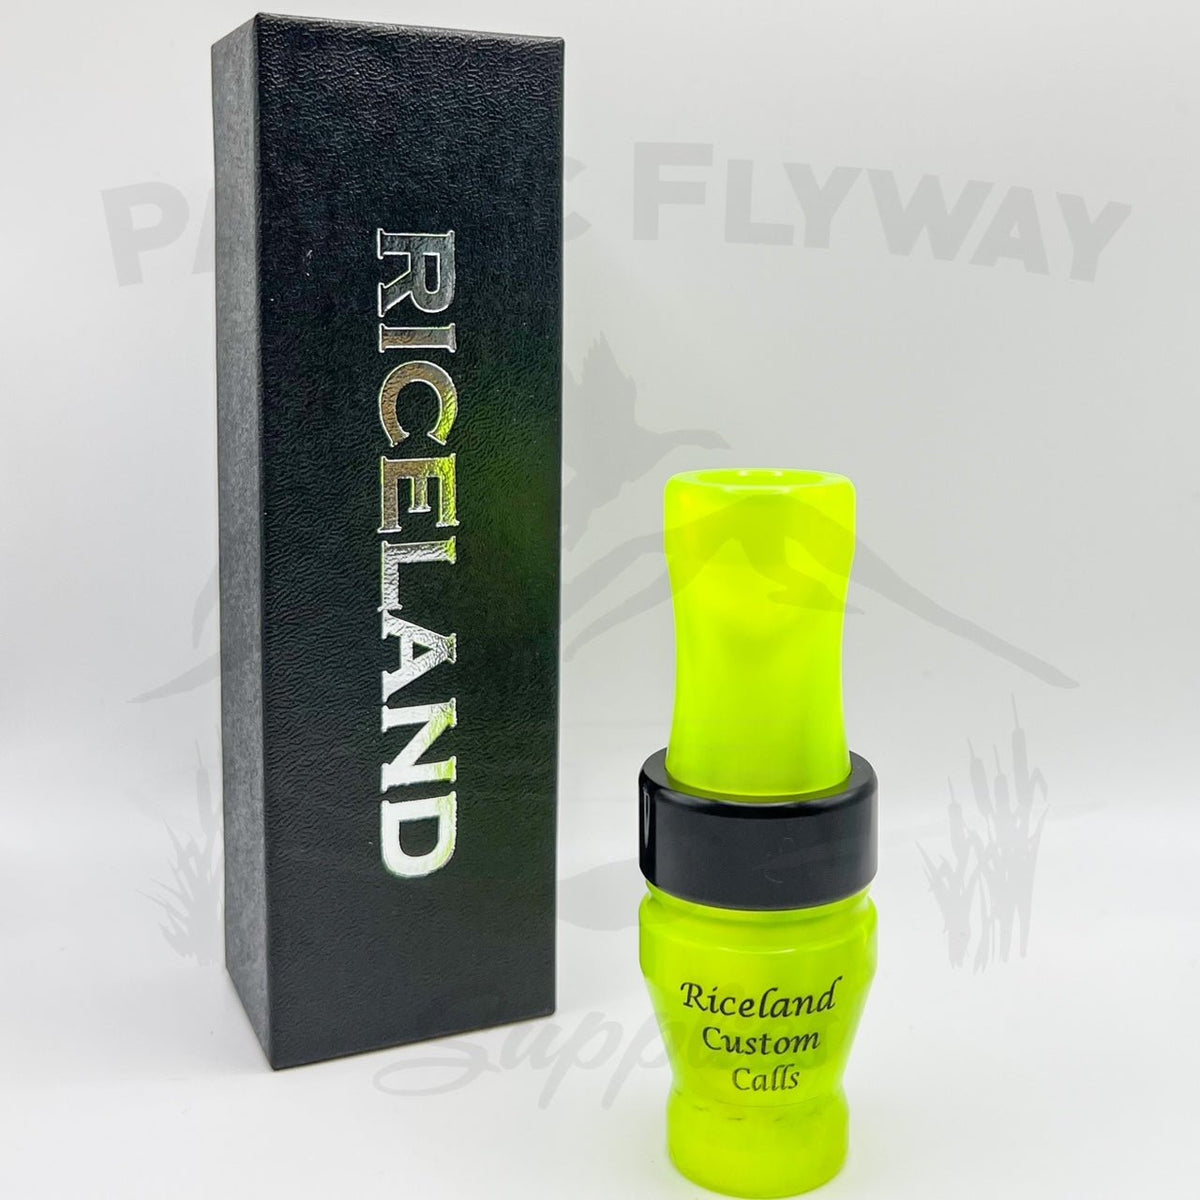 Riceland Custom Calls Specklebelly Acrylic 3/4" Guts Special Edition Shortly Barrel Polished Chartreuse Pearl Black Band - Pacific Flyway Supplies